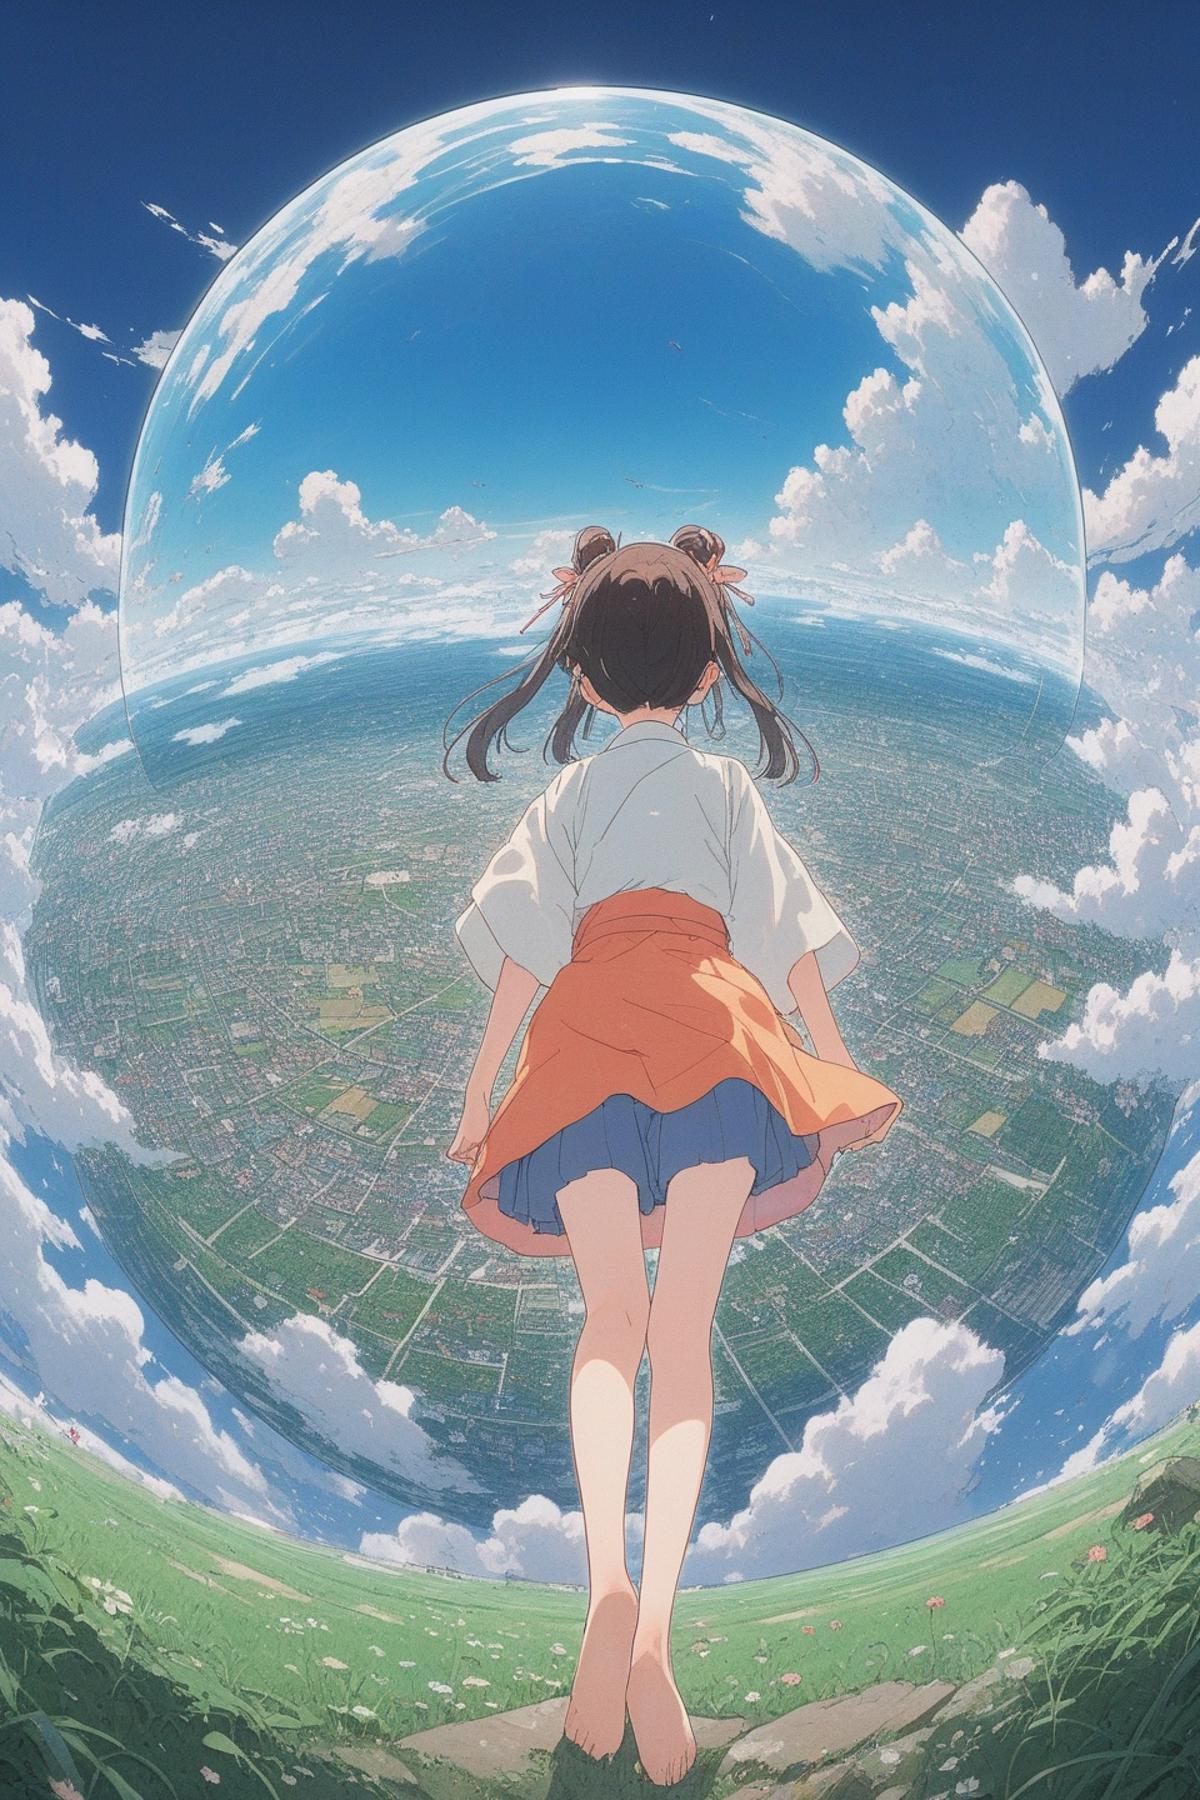 Anime girl with ponytails flying in the air with a cityscape in the background.